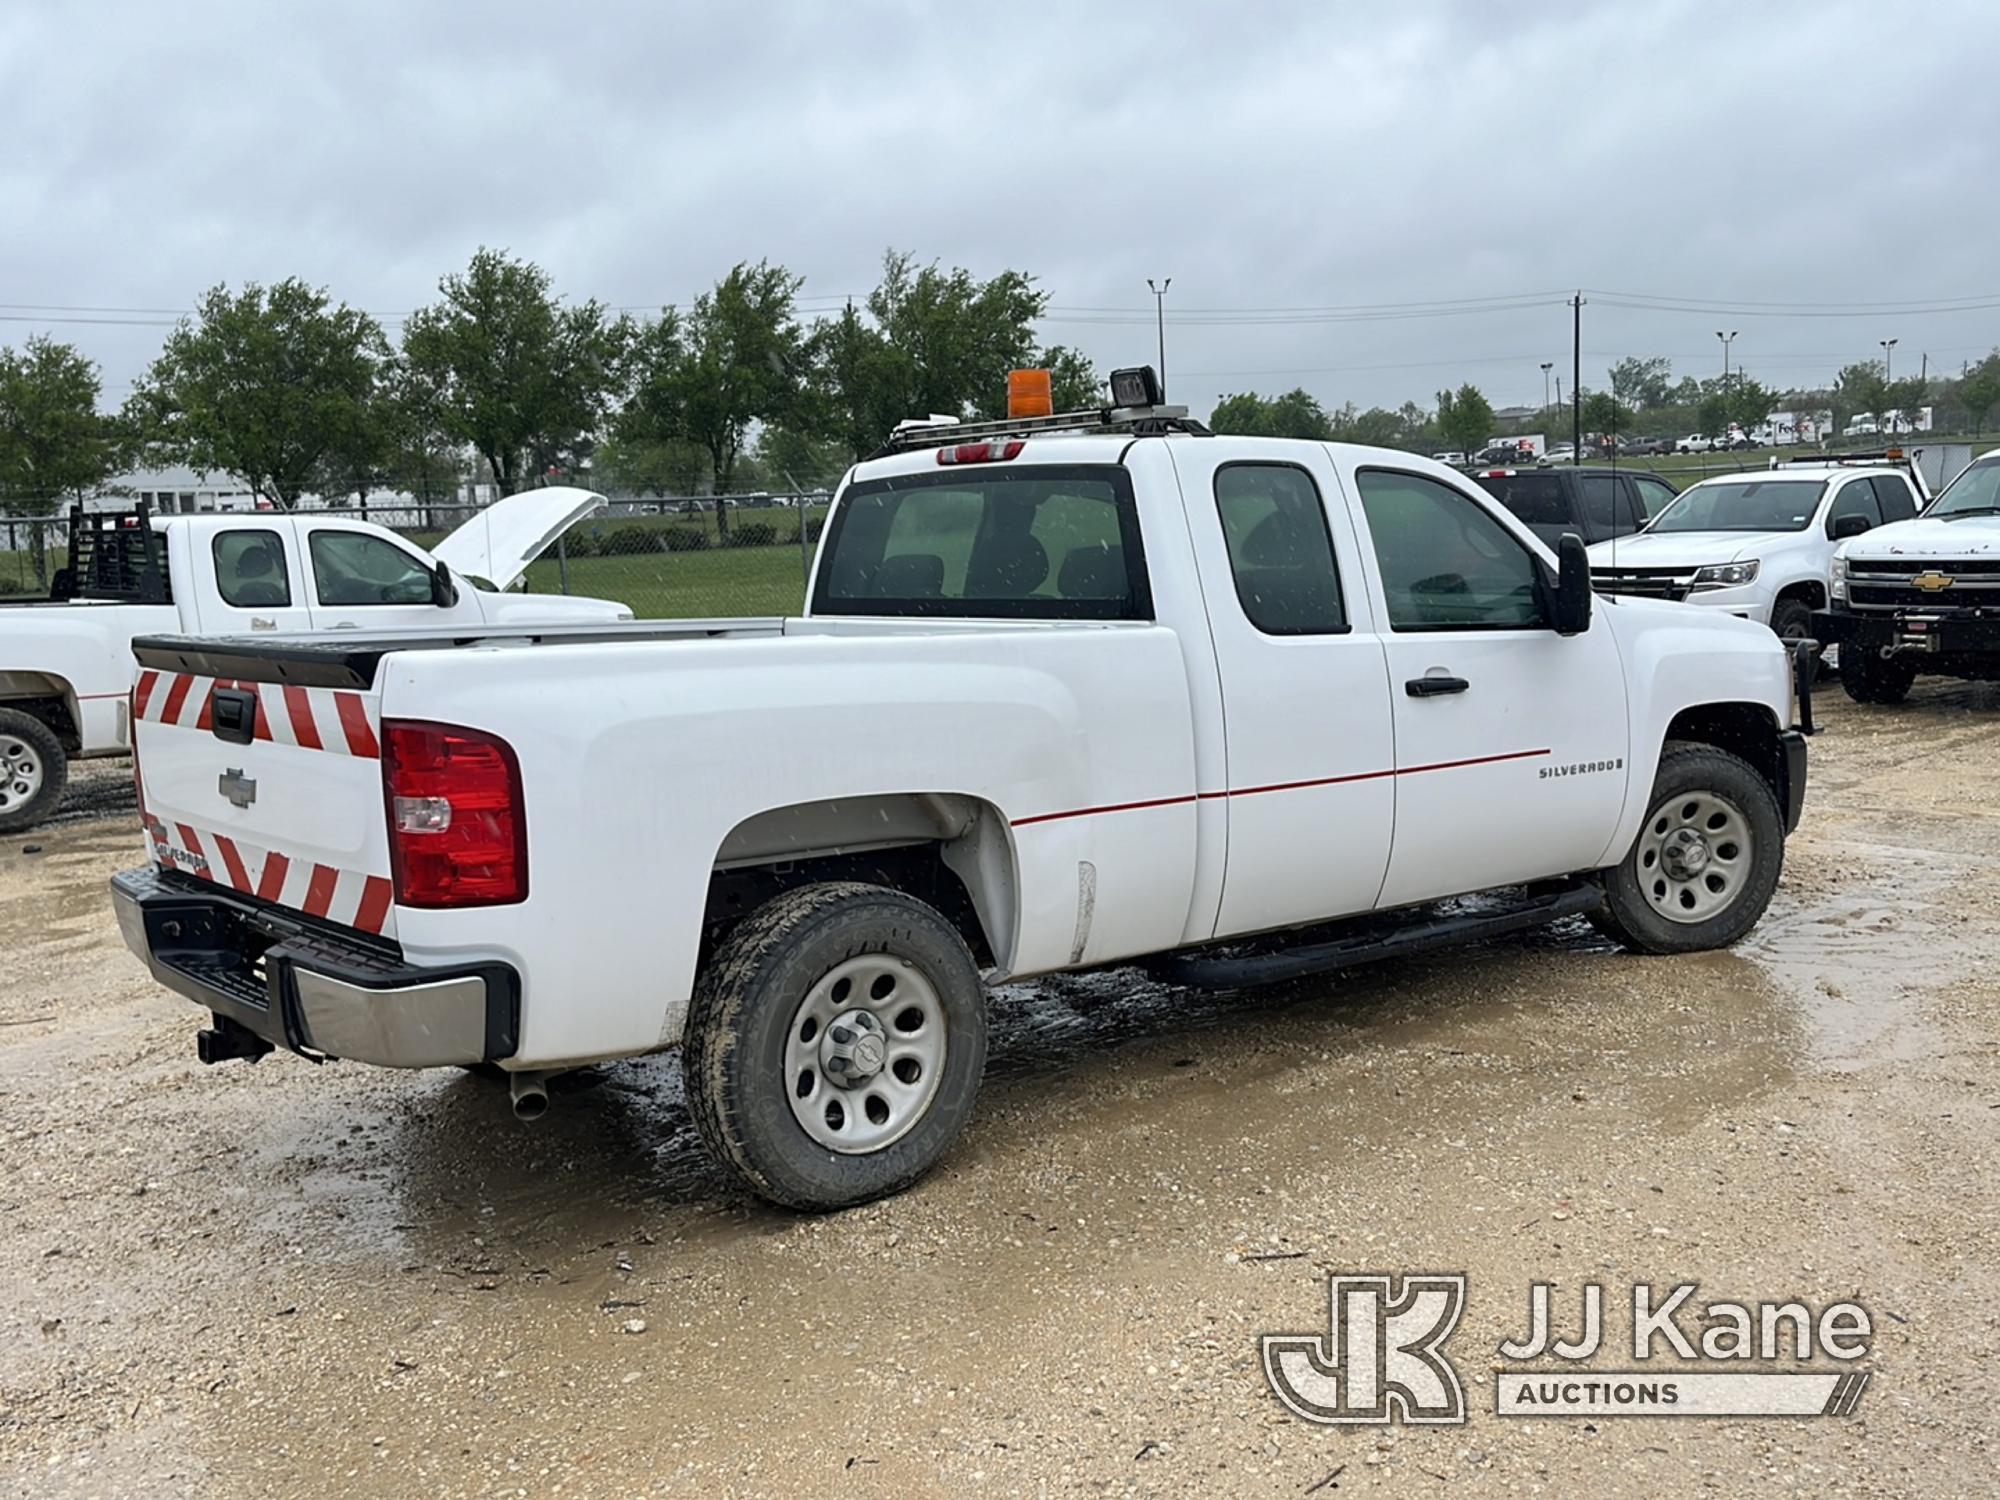 (Houston, TX) 2009 Chevrolet Silverado 1500 4x4 Extended-Cab Pickup Truck Not Running, Condition Unk